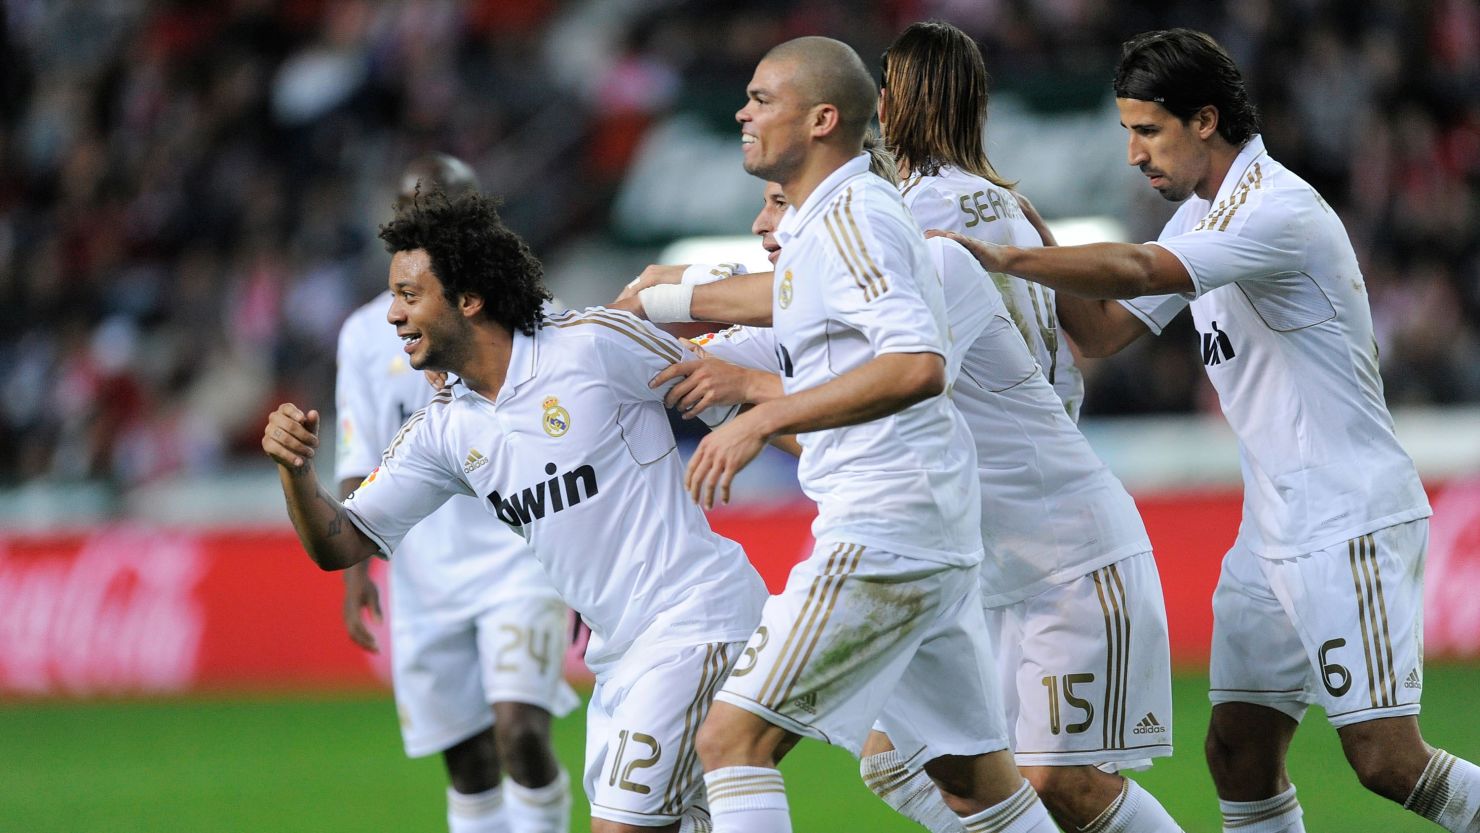 Marcelo (left) celebrates win his Real Madrid team mates after scoring the third goal in their La Liga win over Sporting Gijon 